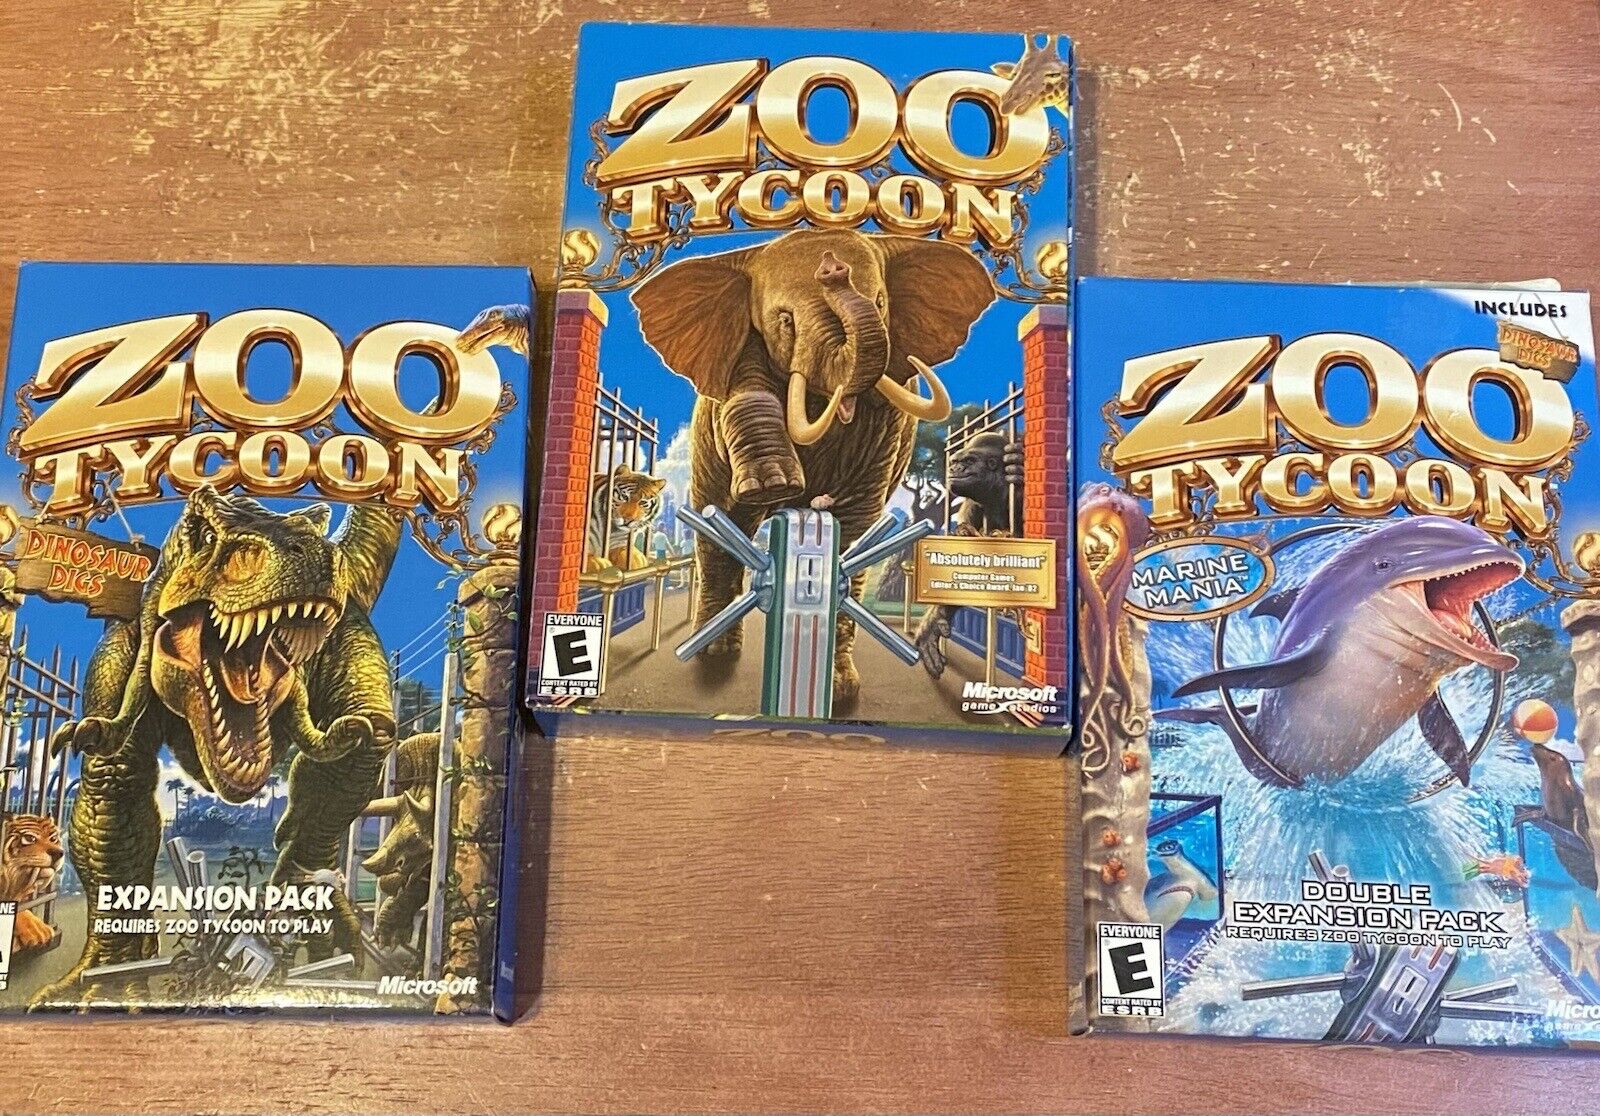 Zoo Tycoon Dino Digs Expansion Pack (PC CD-Rom 2002)